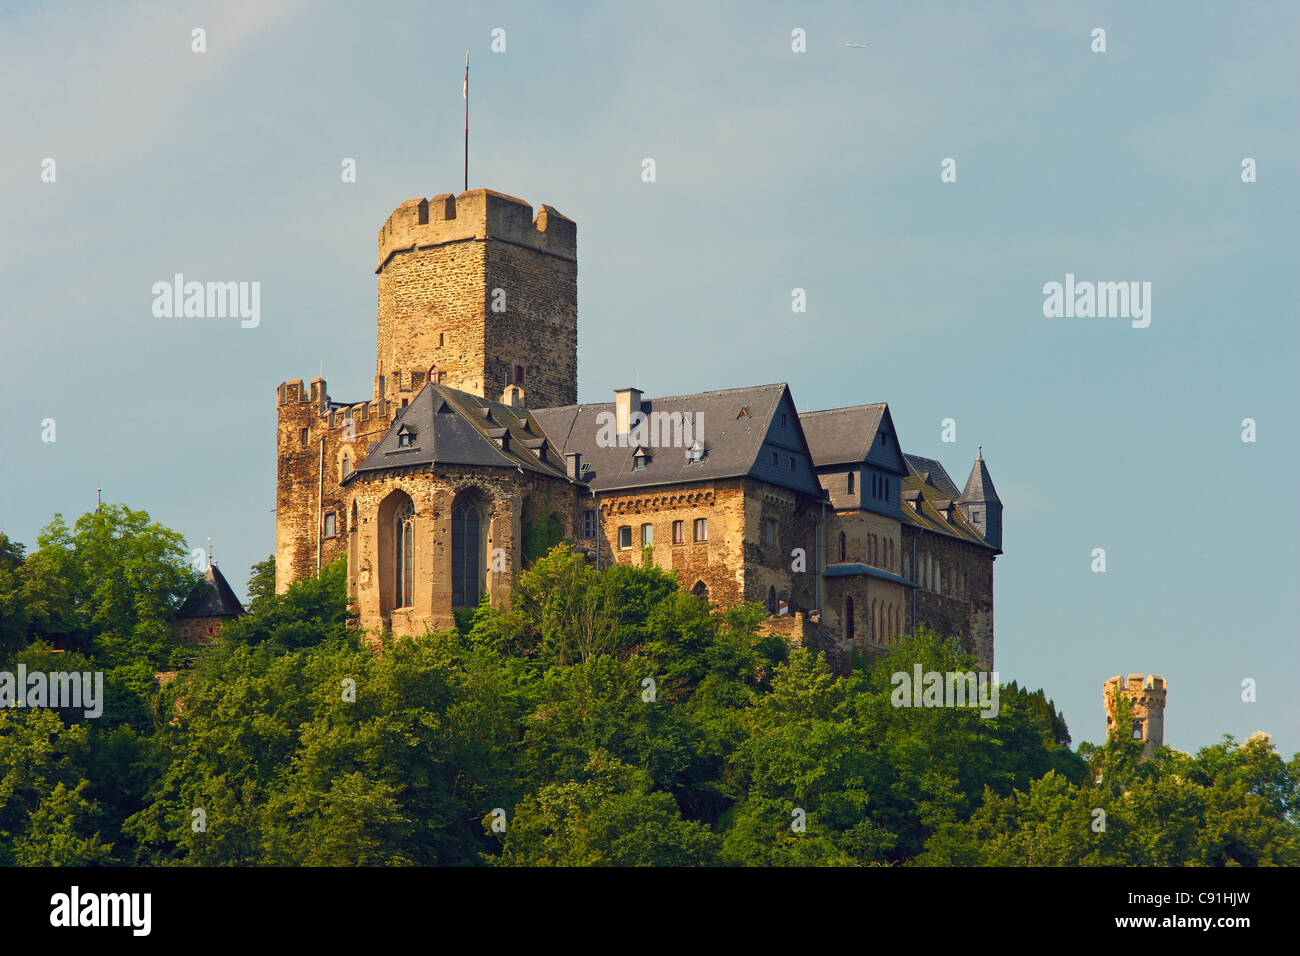 Lahneck castle Lahnstein Lahn Cultural Heritage of the World: Oberes ...